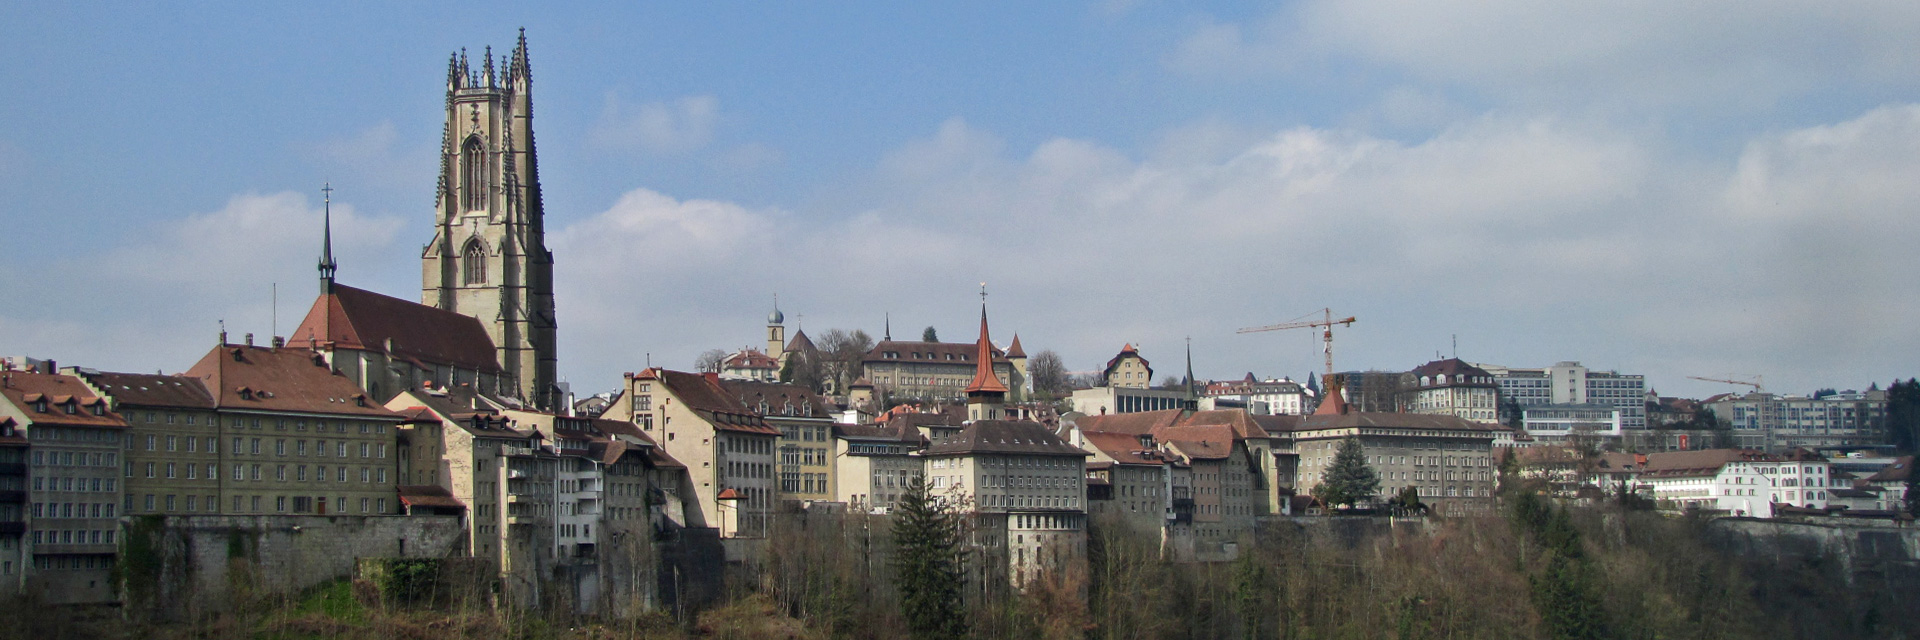 Fribourg